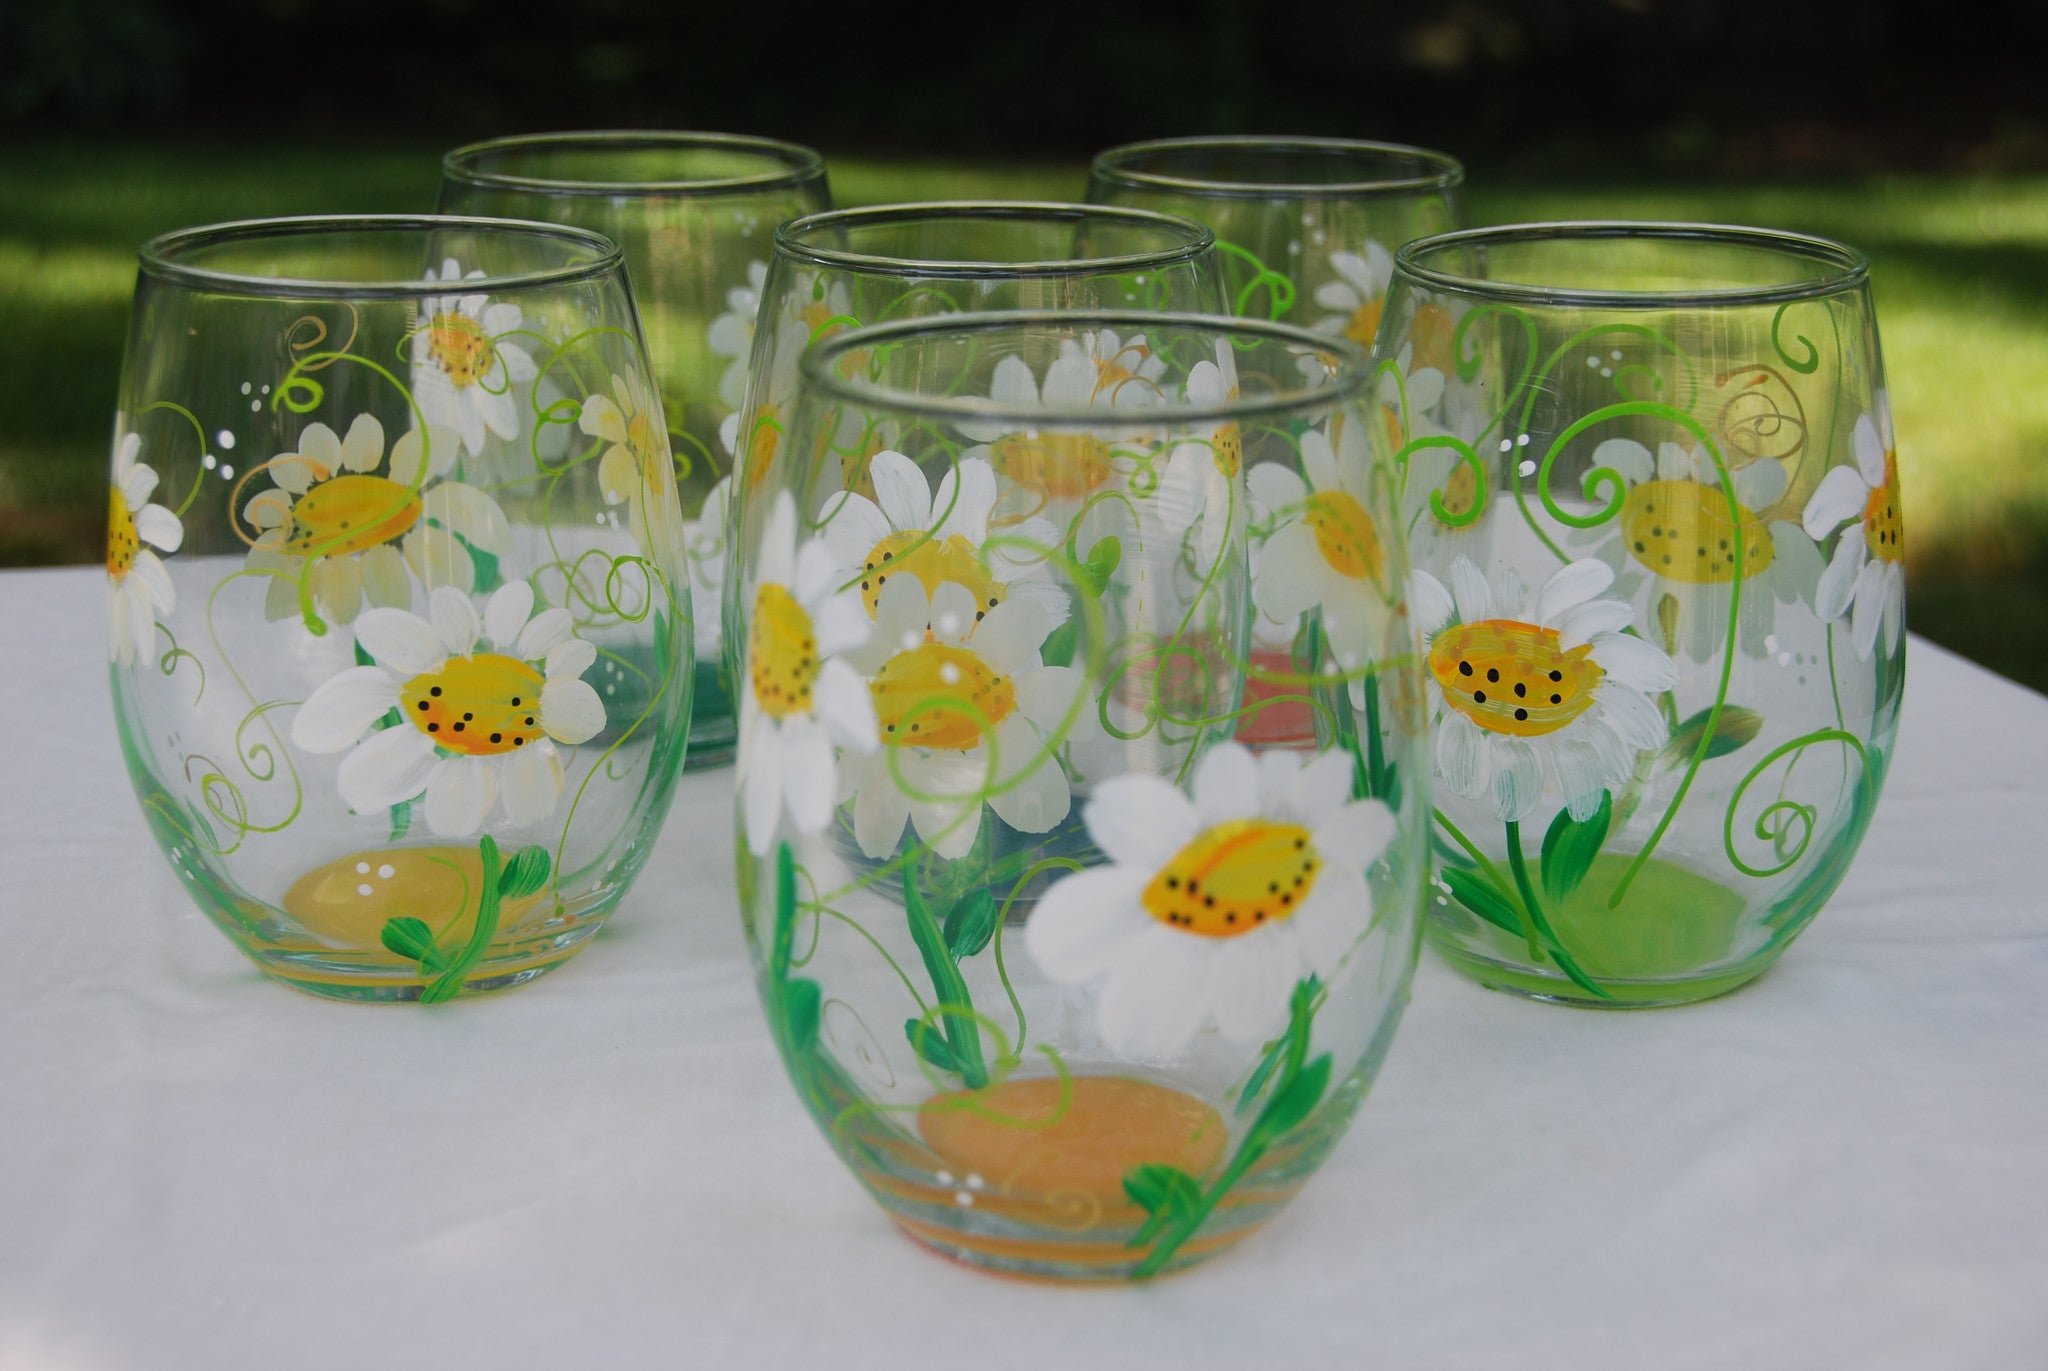 Daisy Flower Hand-painted Wine Glasses